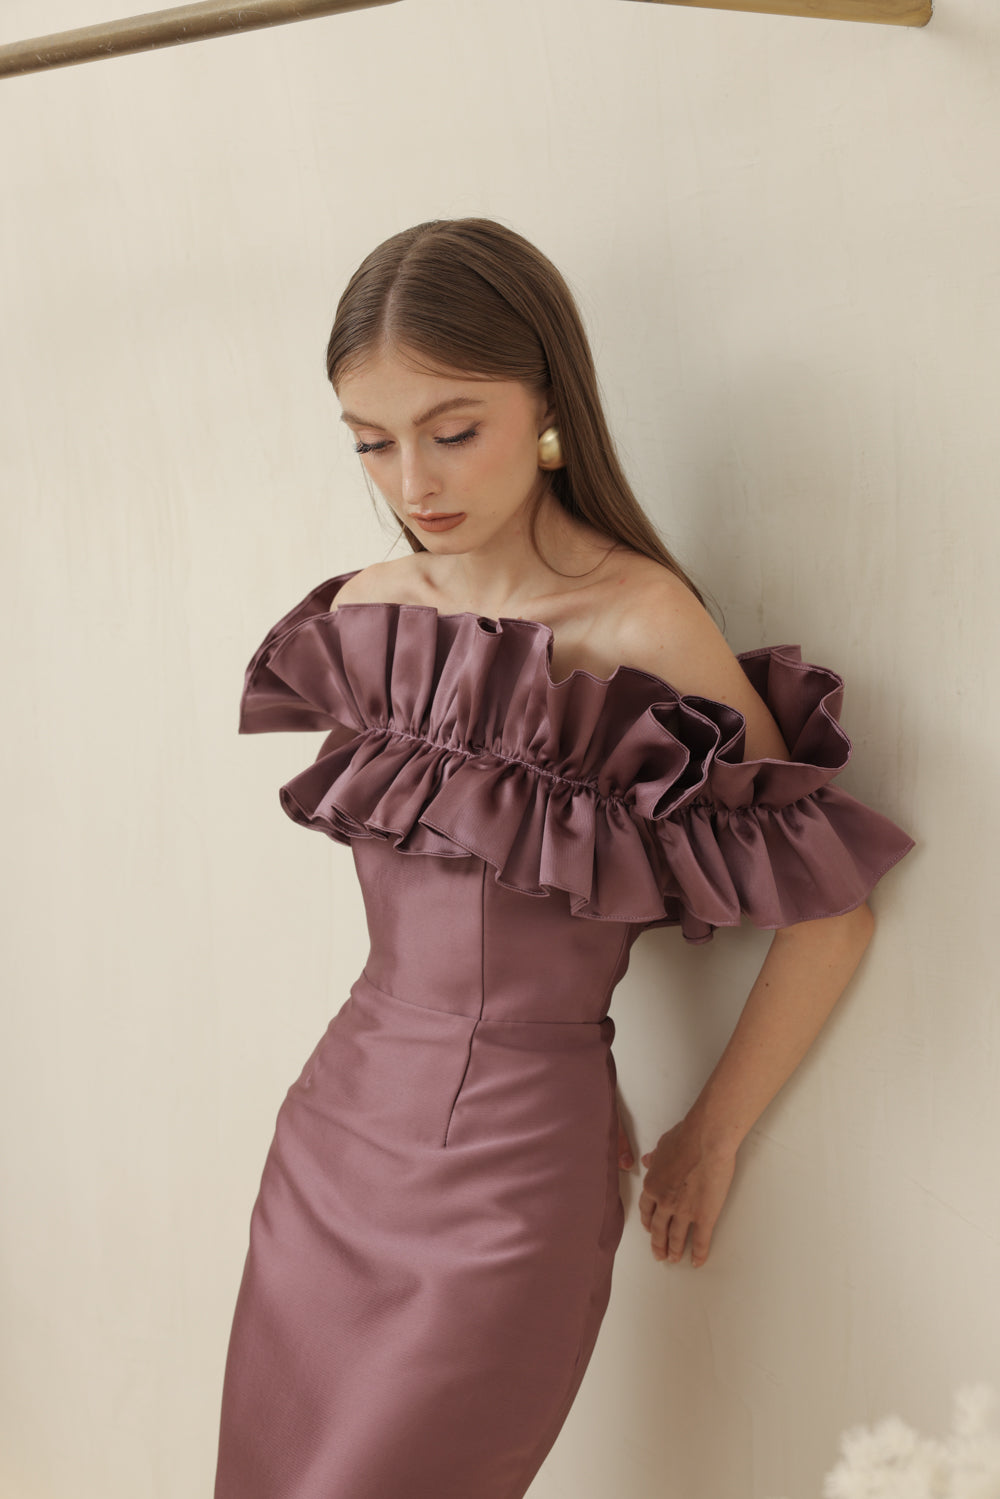 CLEMENTINE DRESS Off Shoulder Pencil Skirt Maxi Gown with Oversize Ruffle (Dark Mauve Dupioni)